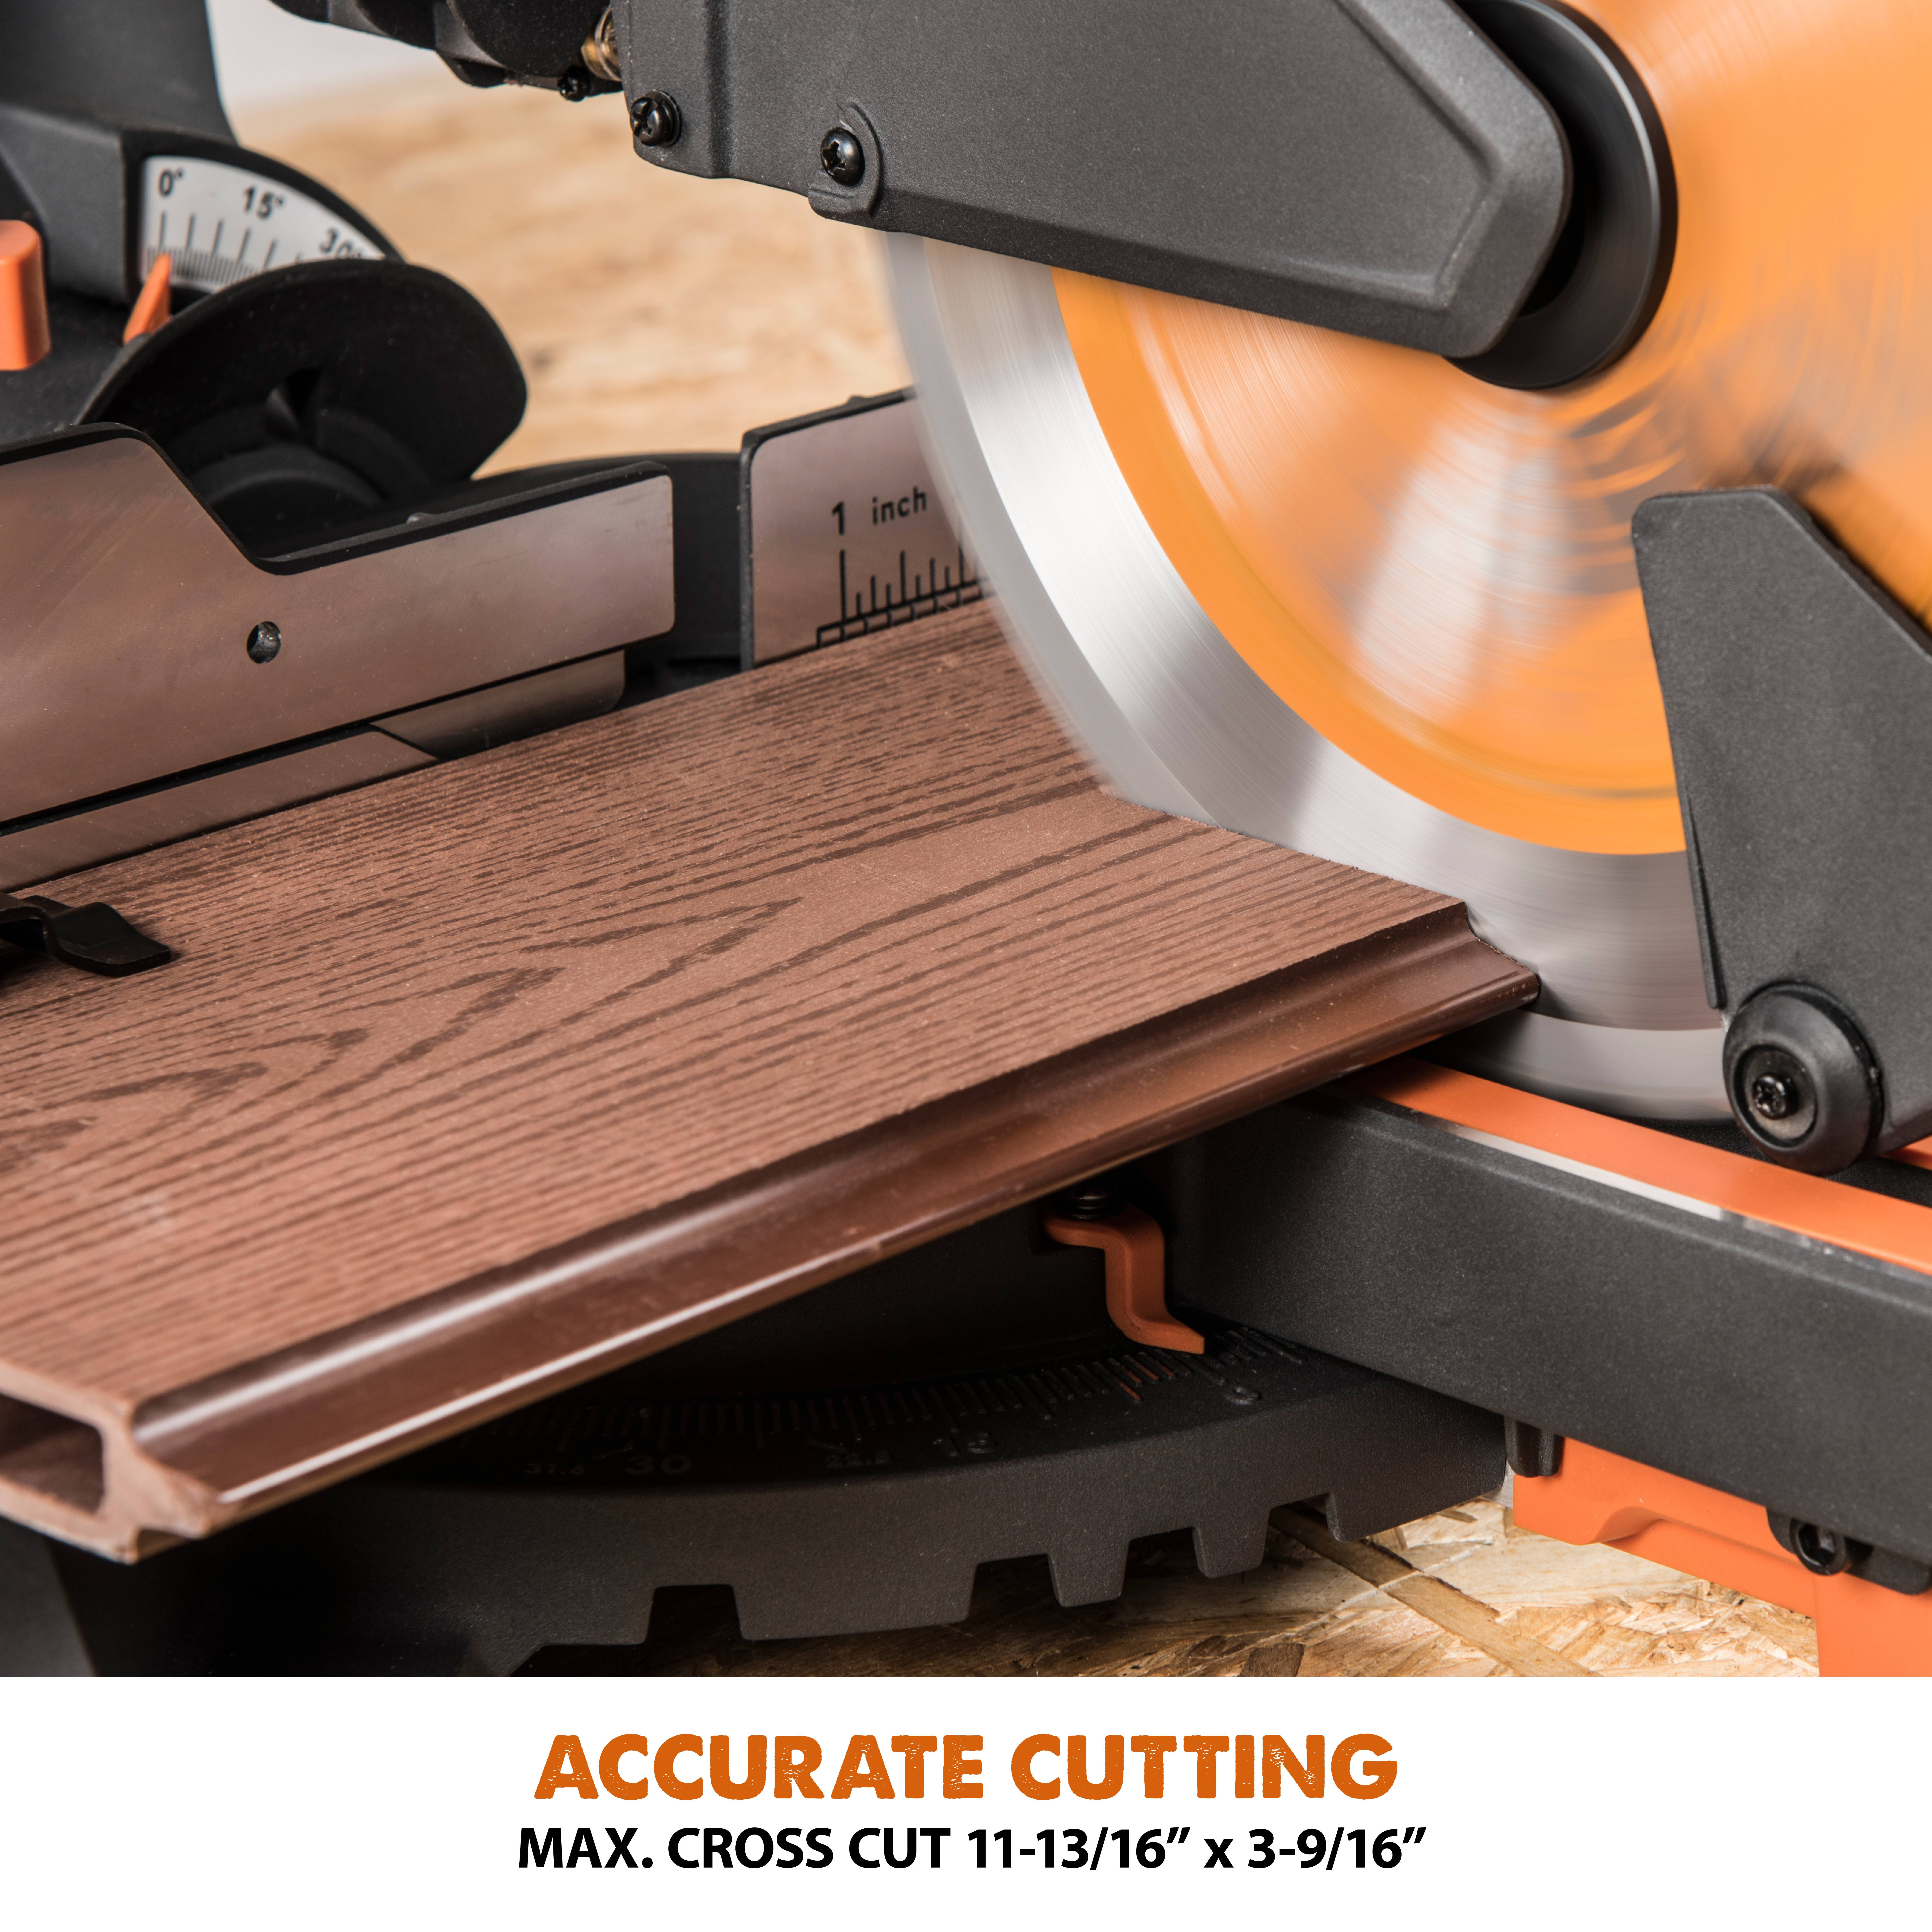 Evolution R255SMS+: Single Bevel Sliding Miter Saw With 10 In. Multi- Material Cutting Blade